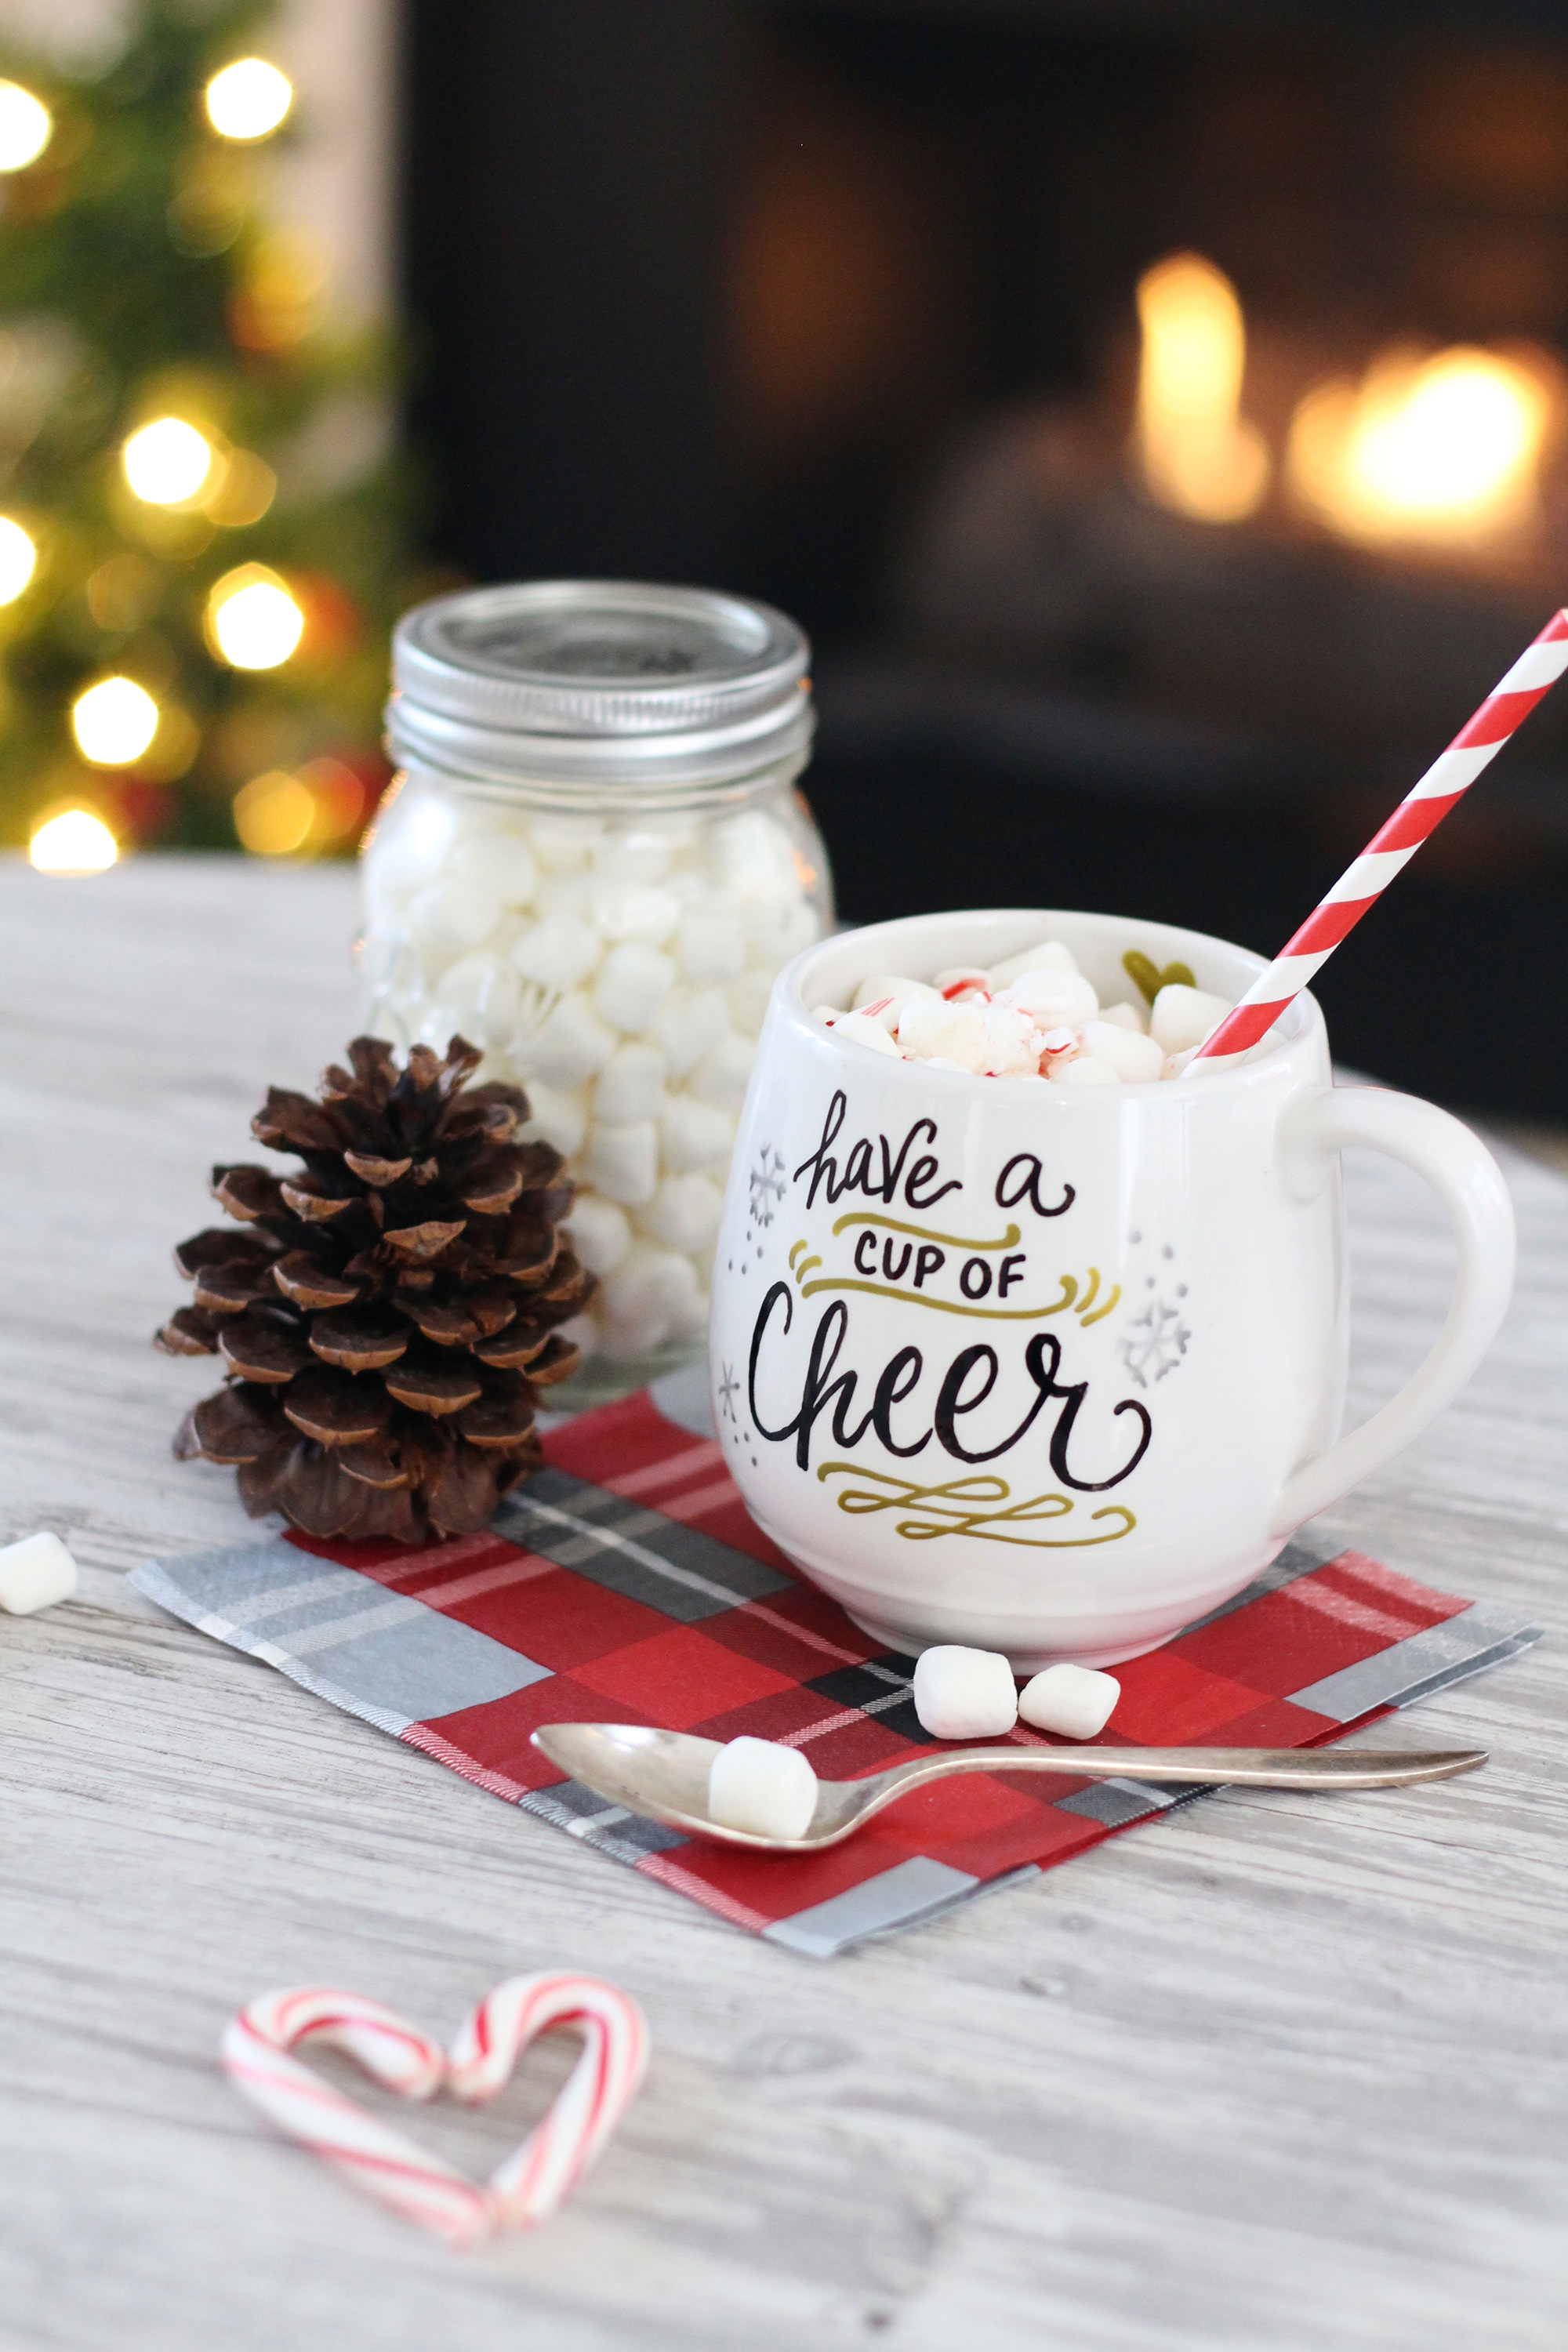 Have a cup of cheer - in a customized, DIY, hand lettered mug!